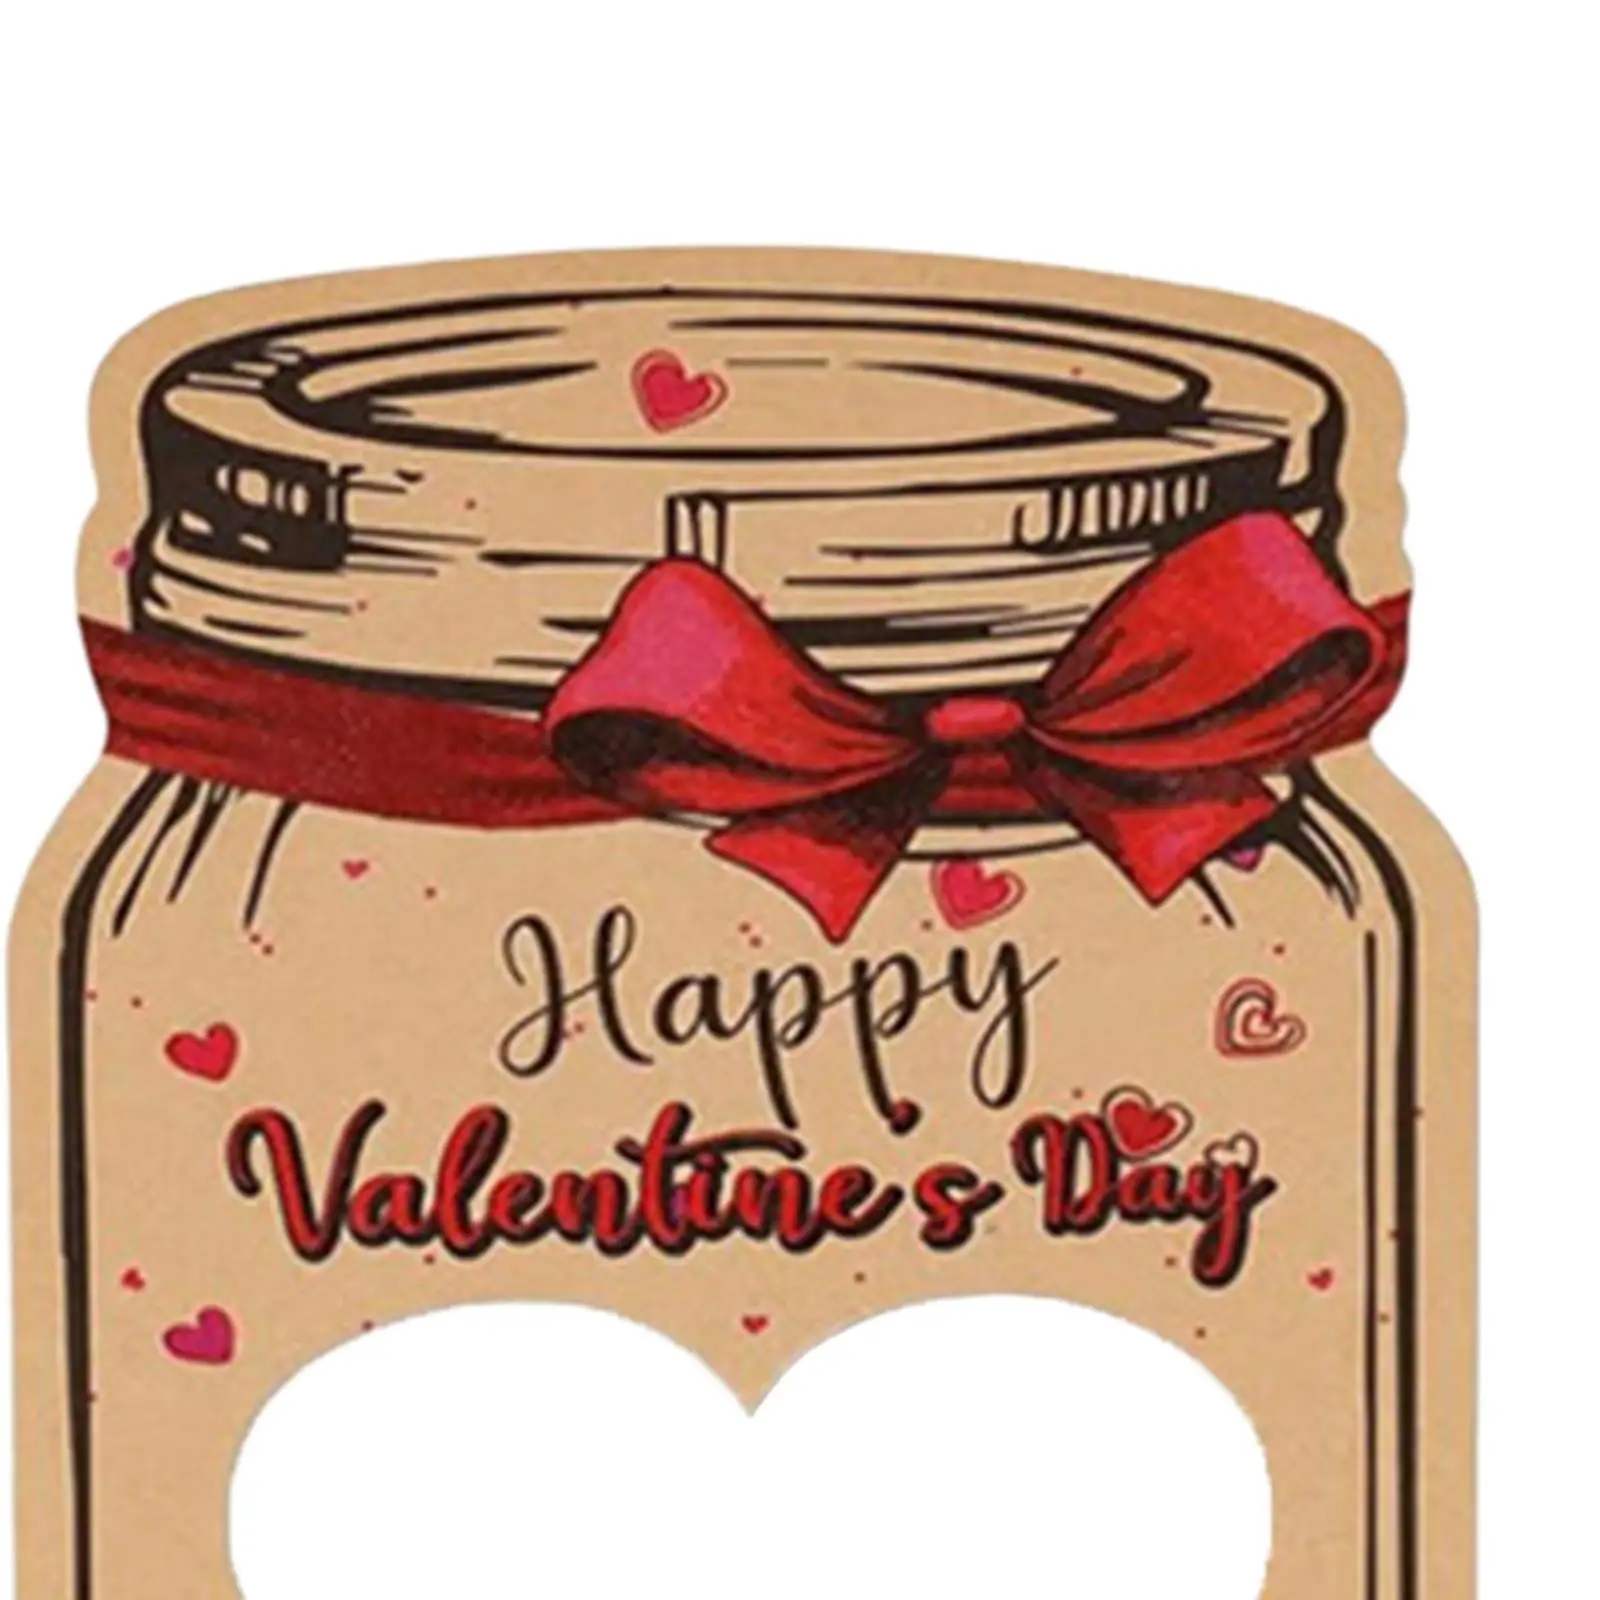 24x Valentines Day Cards Candy Holder Valentine`s Day Craft for Party Favors Classroom Valentine Gift Invitations Girls Boys